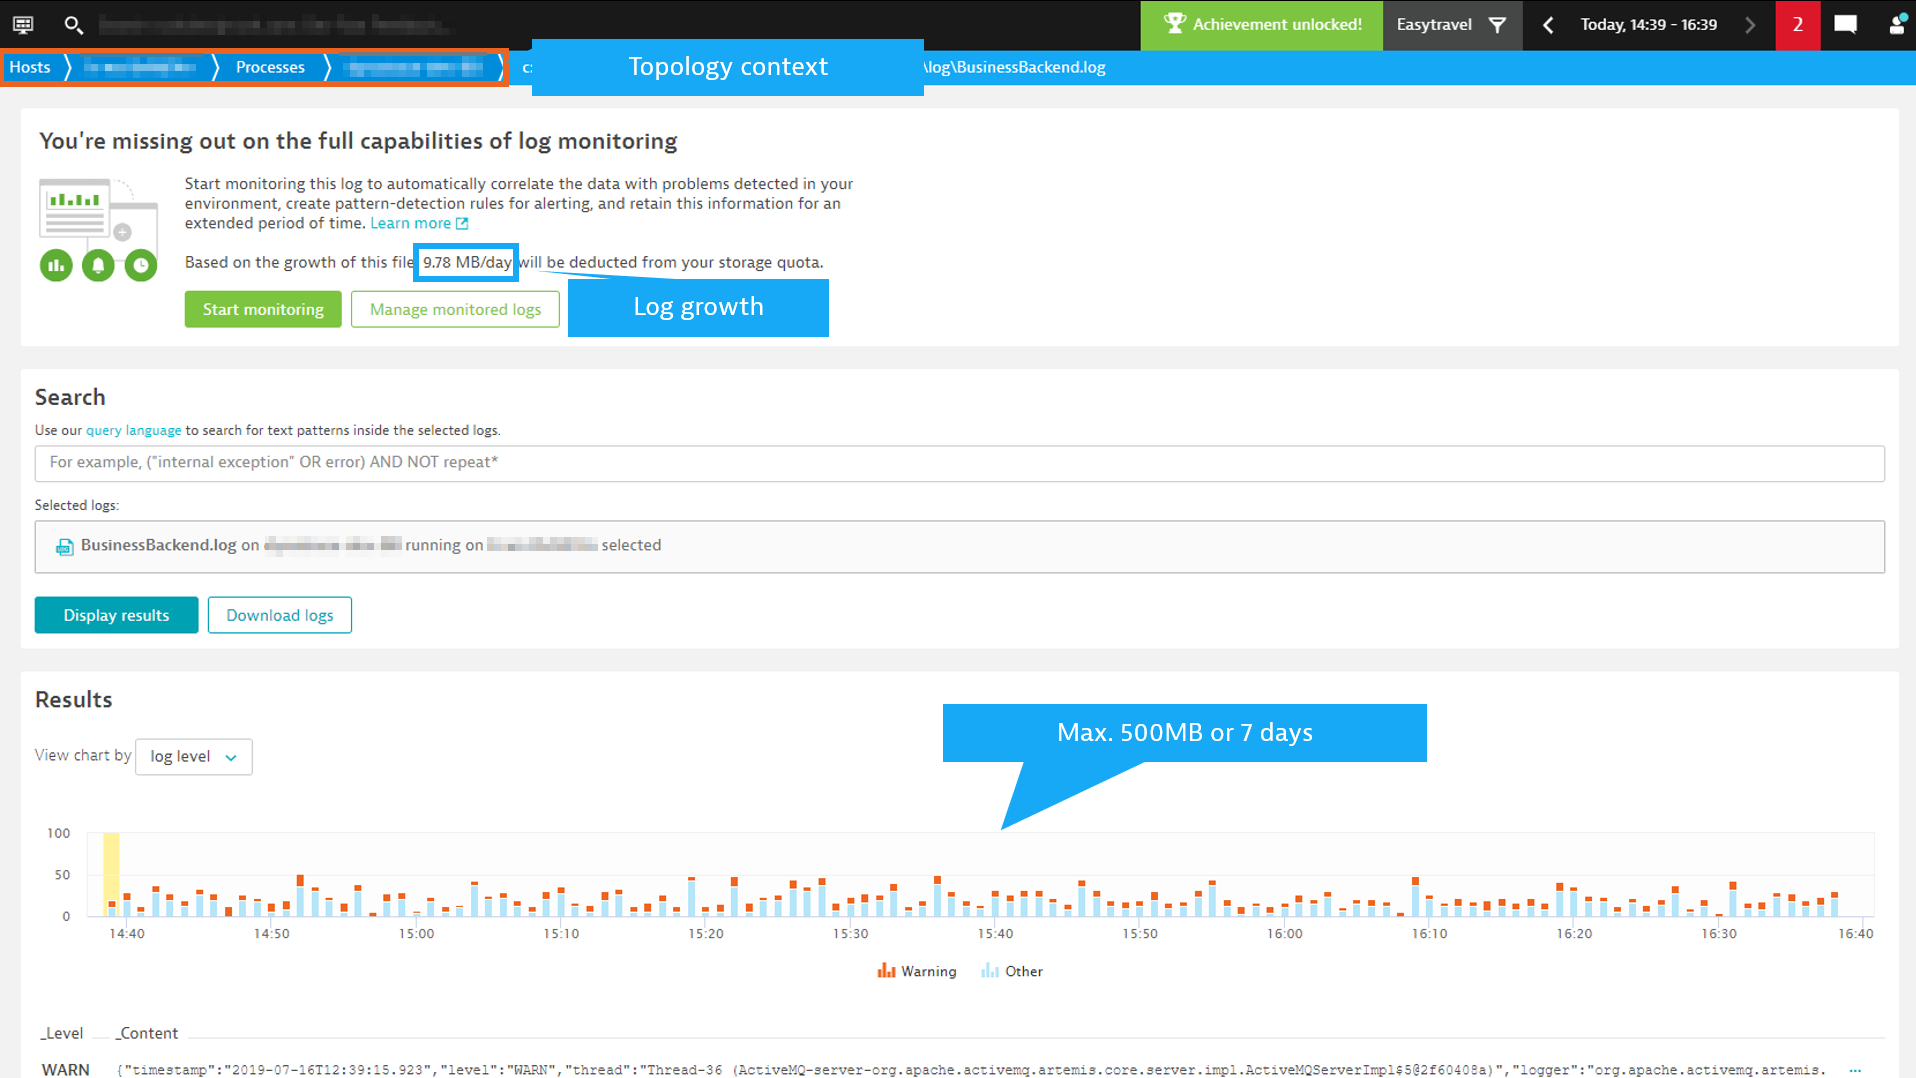 Empower your teams with Dynatrace Log Monitoring | Dynatrace news